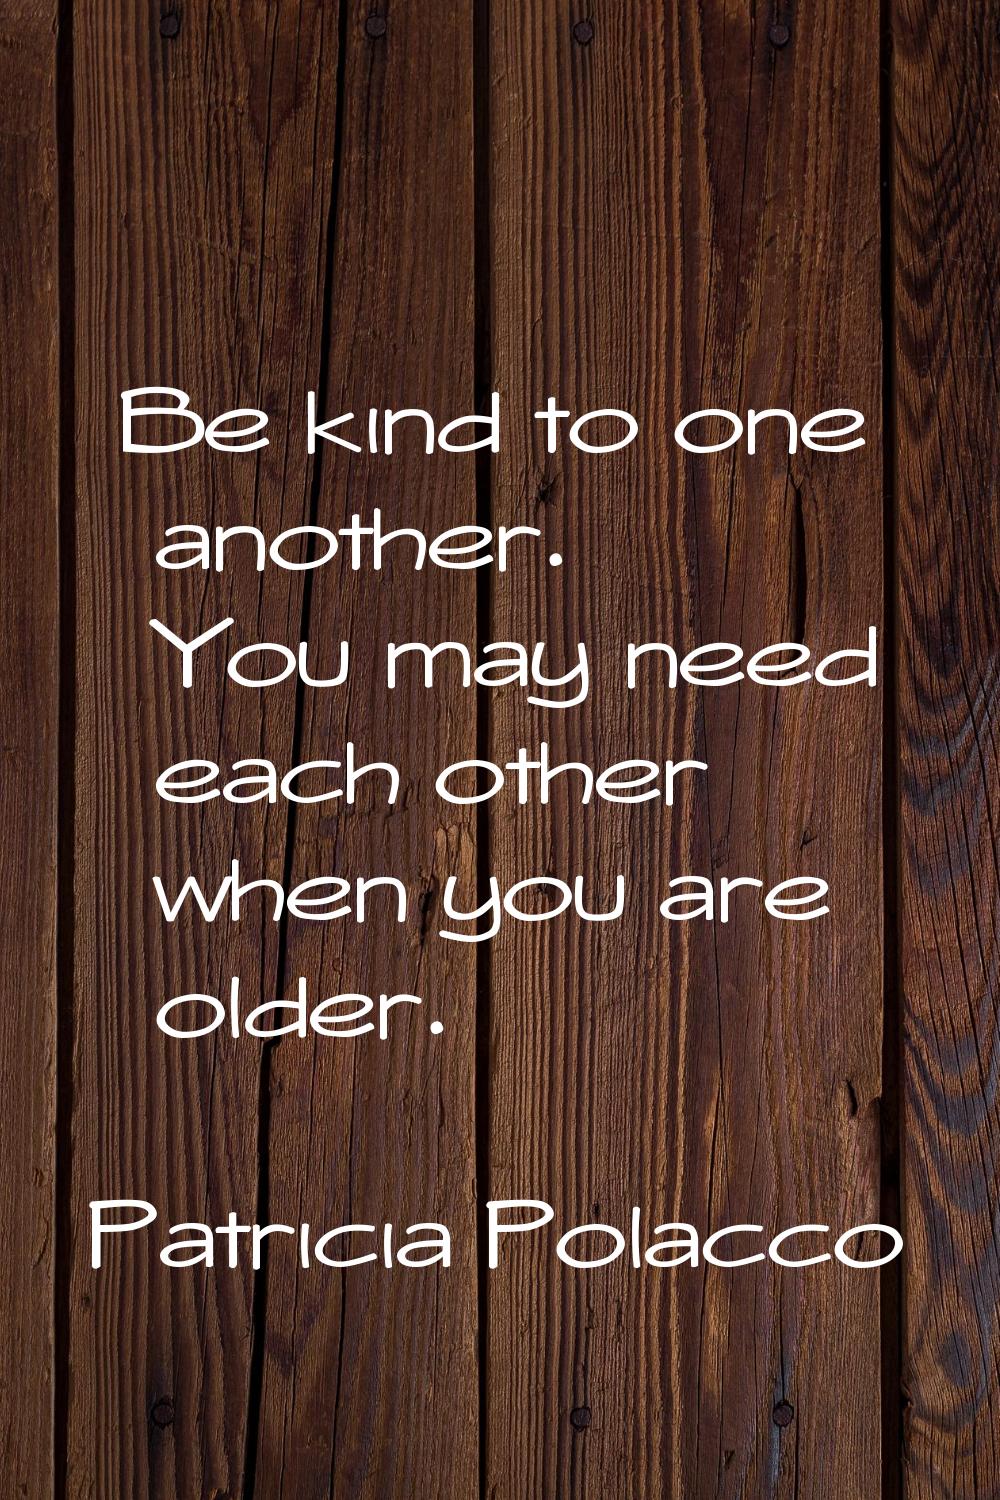 Be kind to one another. You may need each other when you are older.